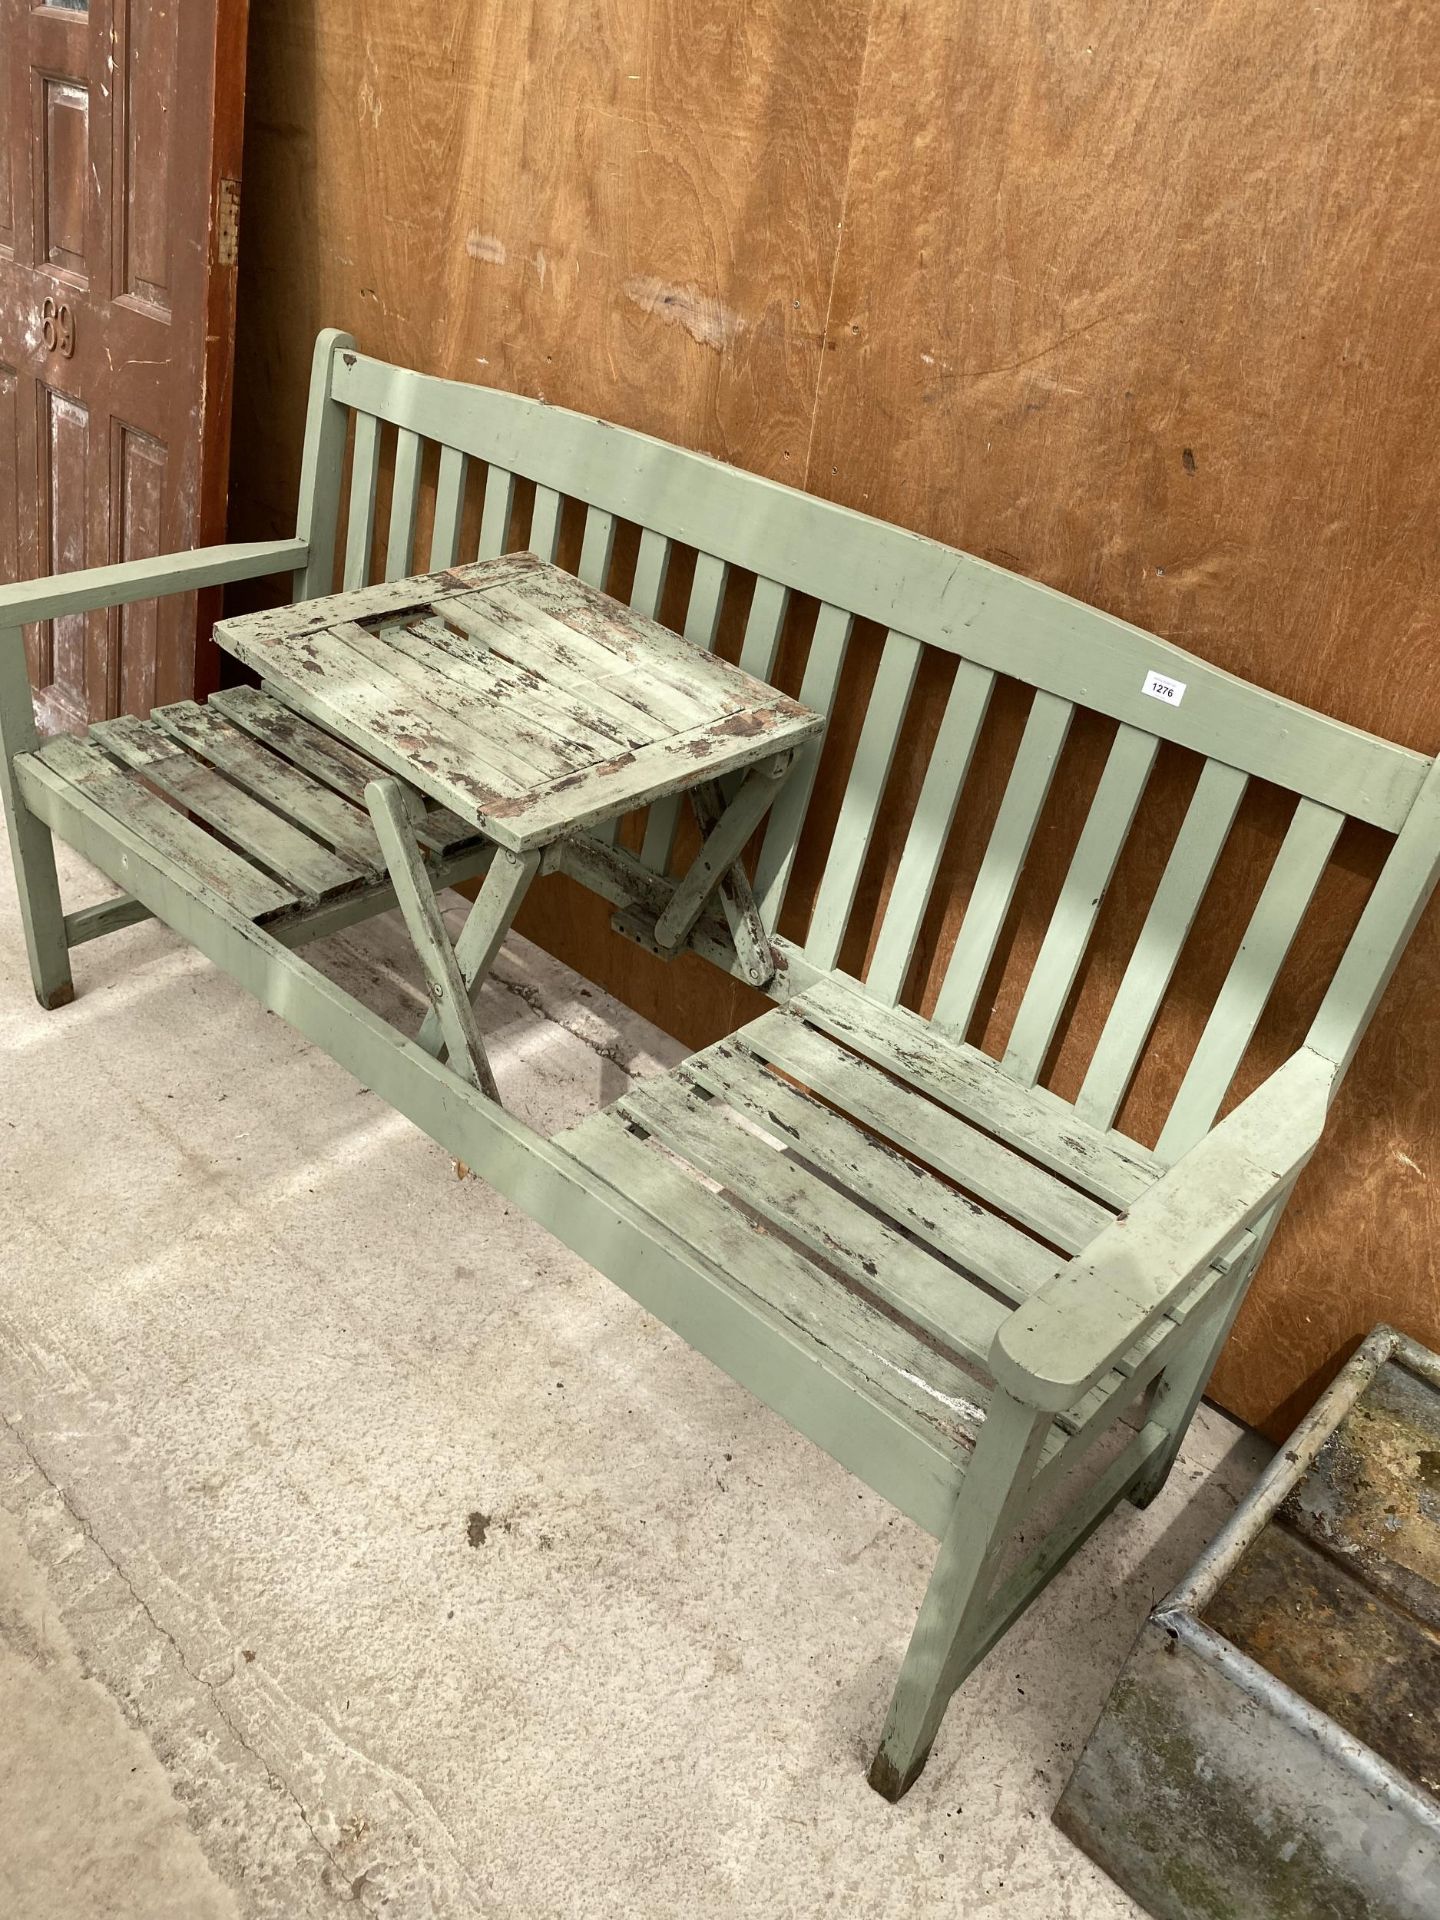 A WOODEN SLATTED GARDEN BENCH - Image 3 of 3